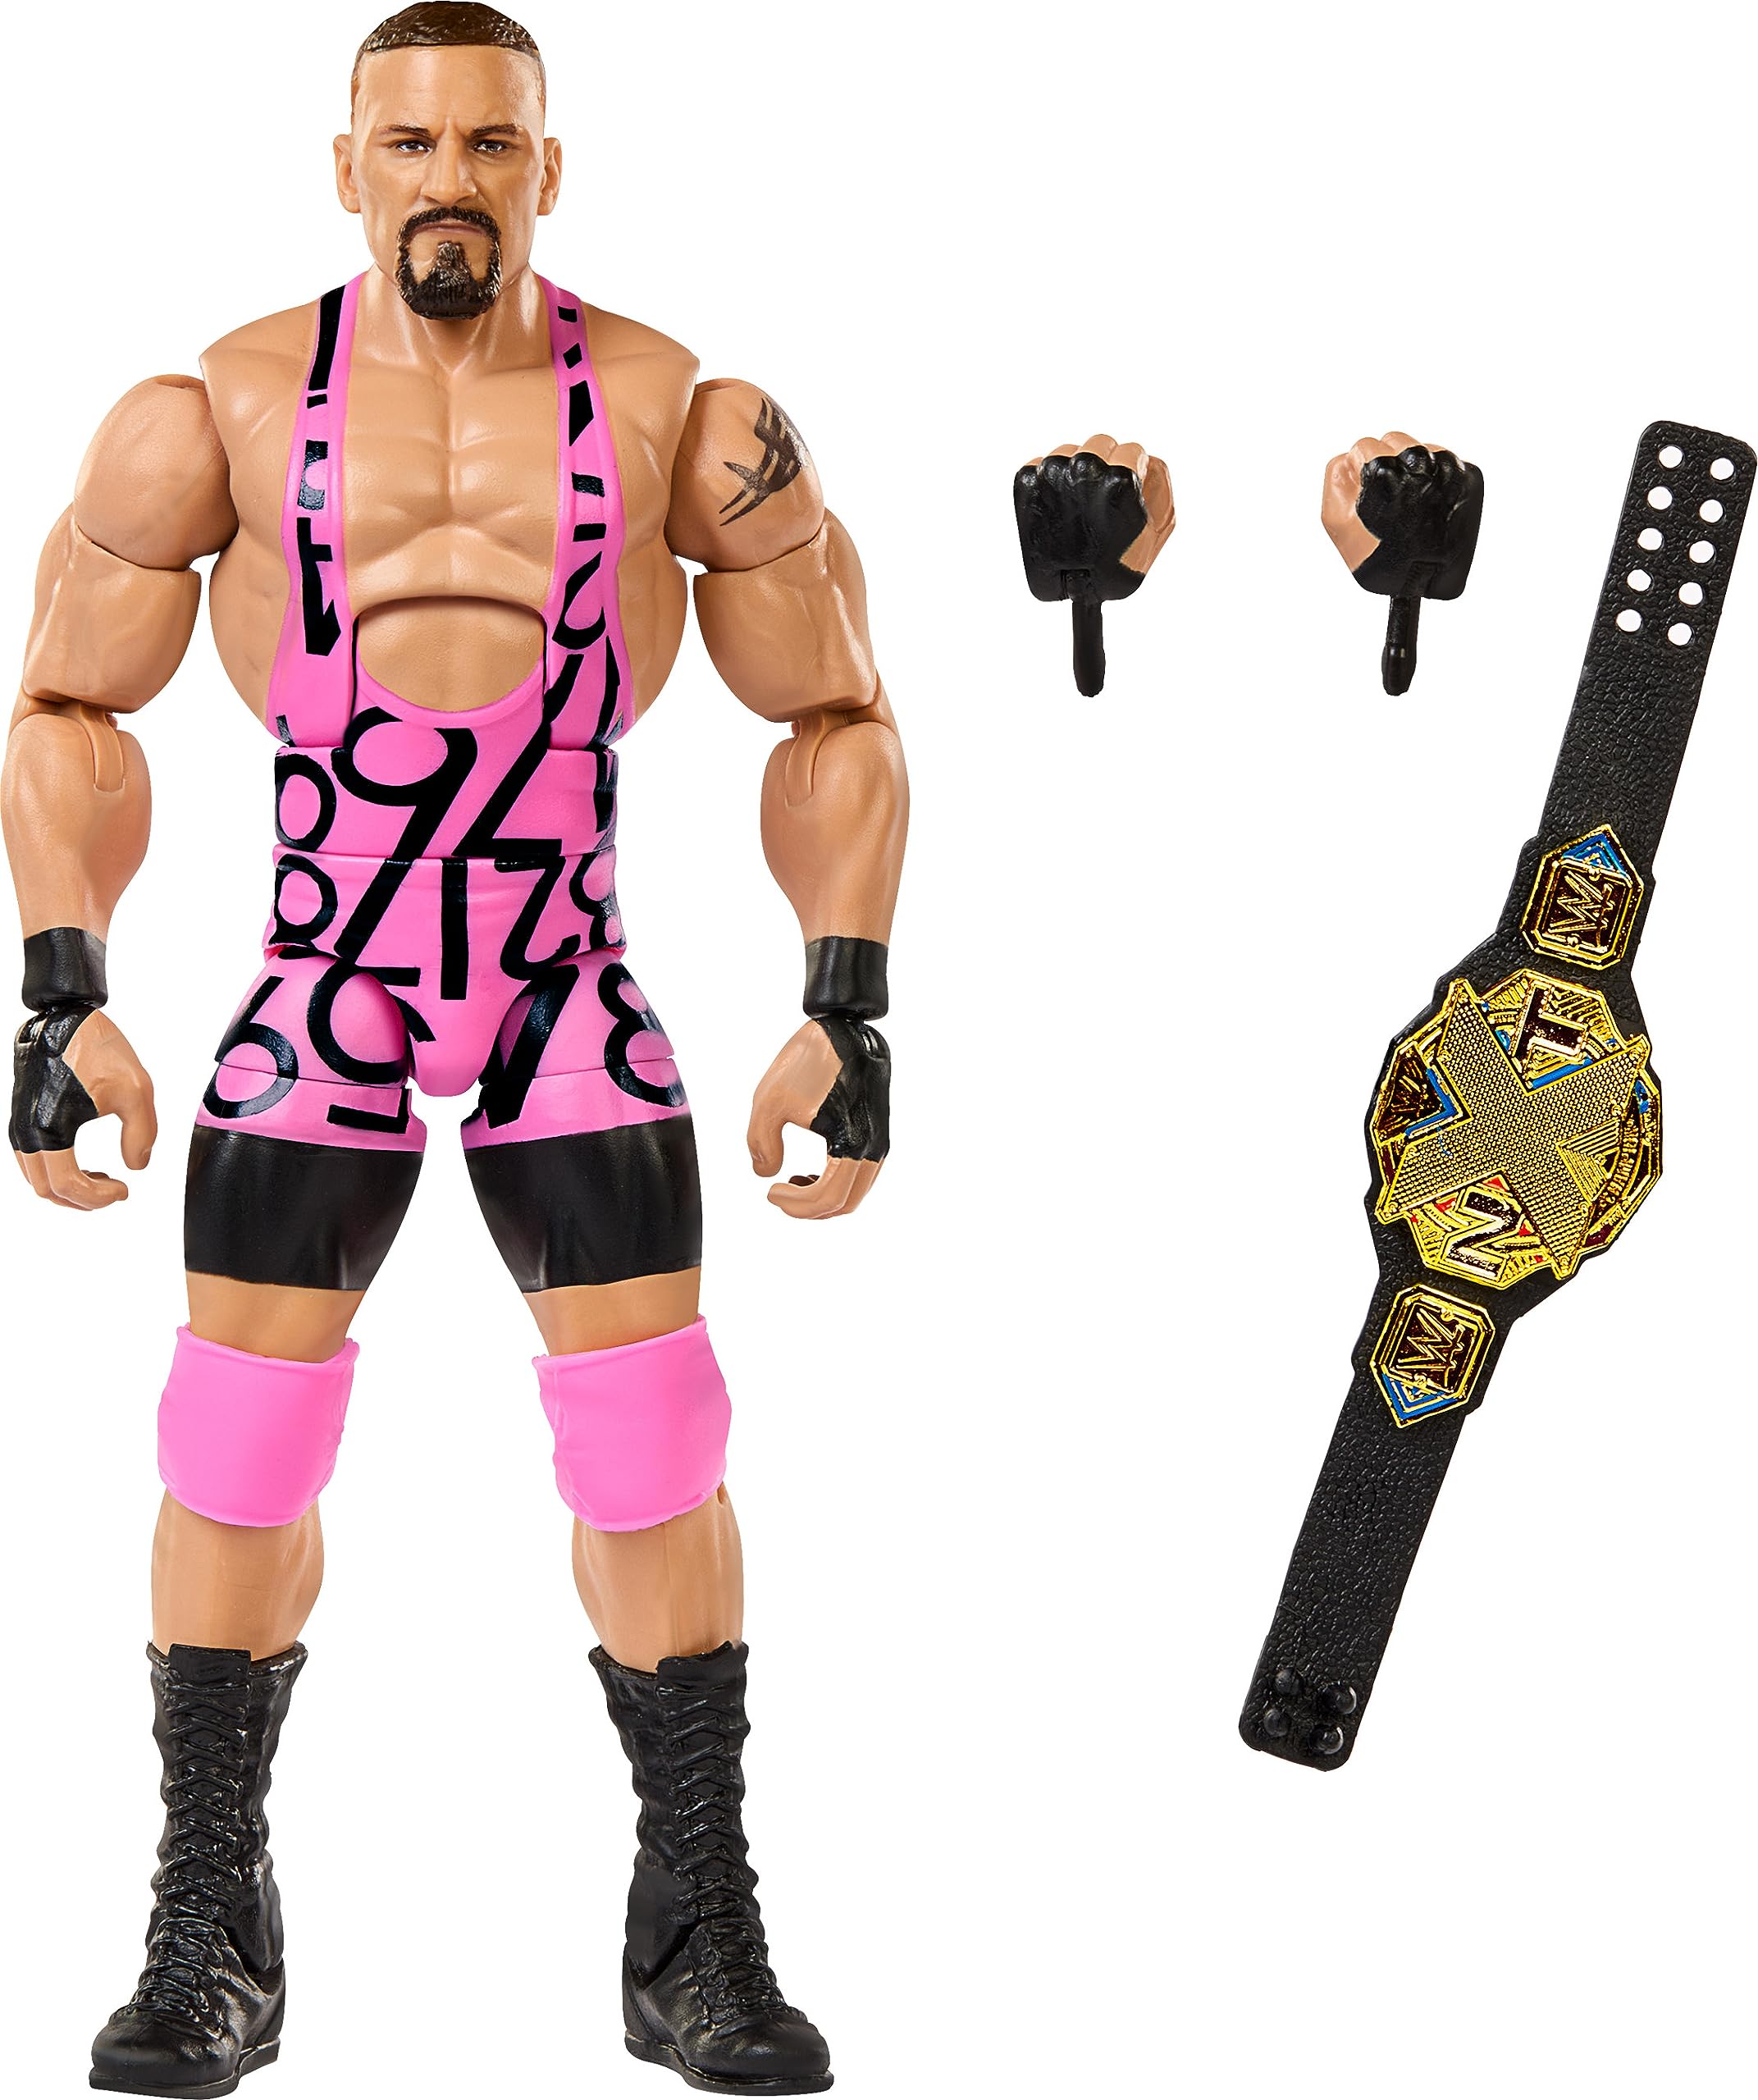 Mattel WWE Bron Breakker Elite Collection Action Figure with Accessories, Articulation & Life-Like Detail, 6-Inch